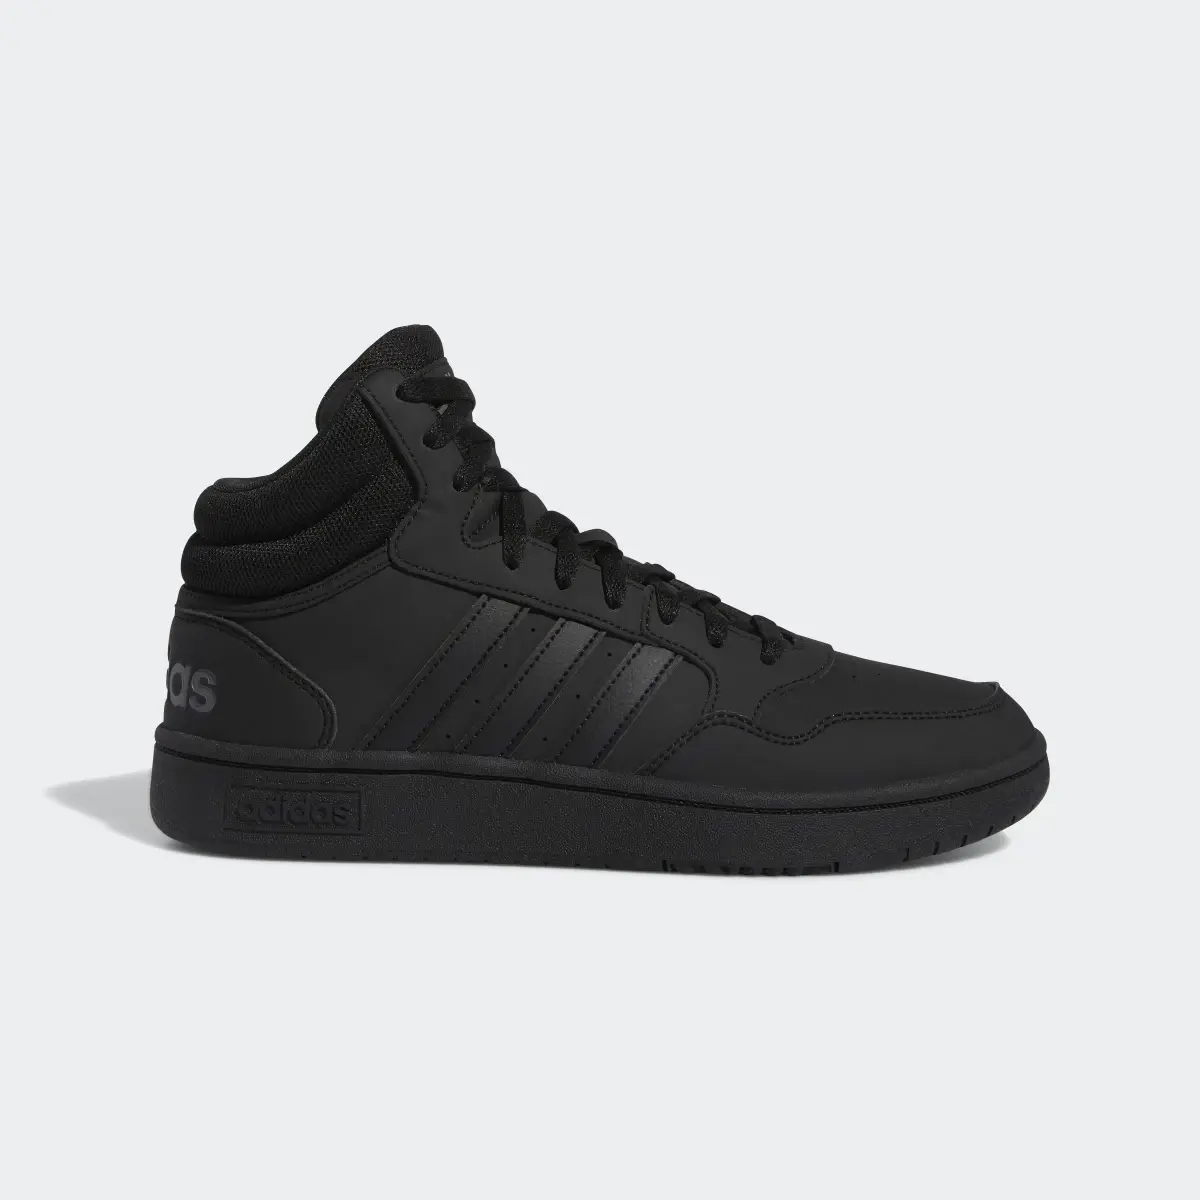 Adidas Hoops 3 Mid Lifestyle Basketball Mid Classic Schuh. 2